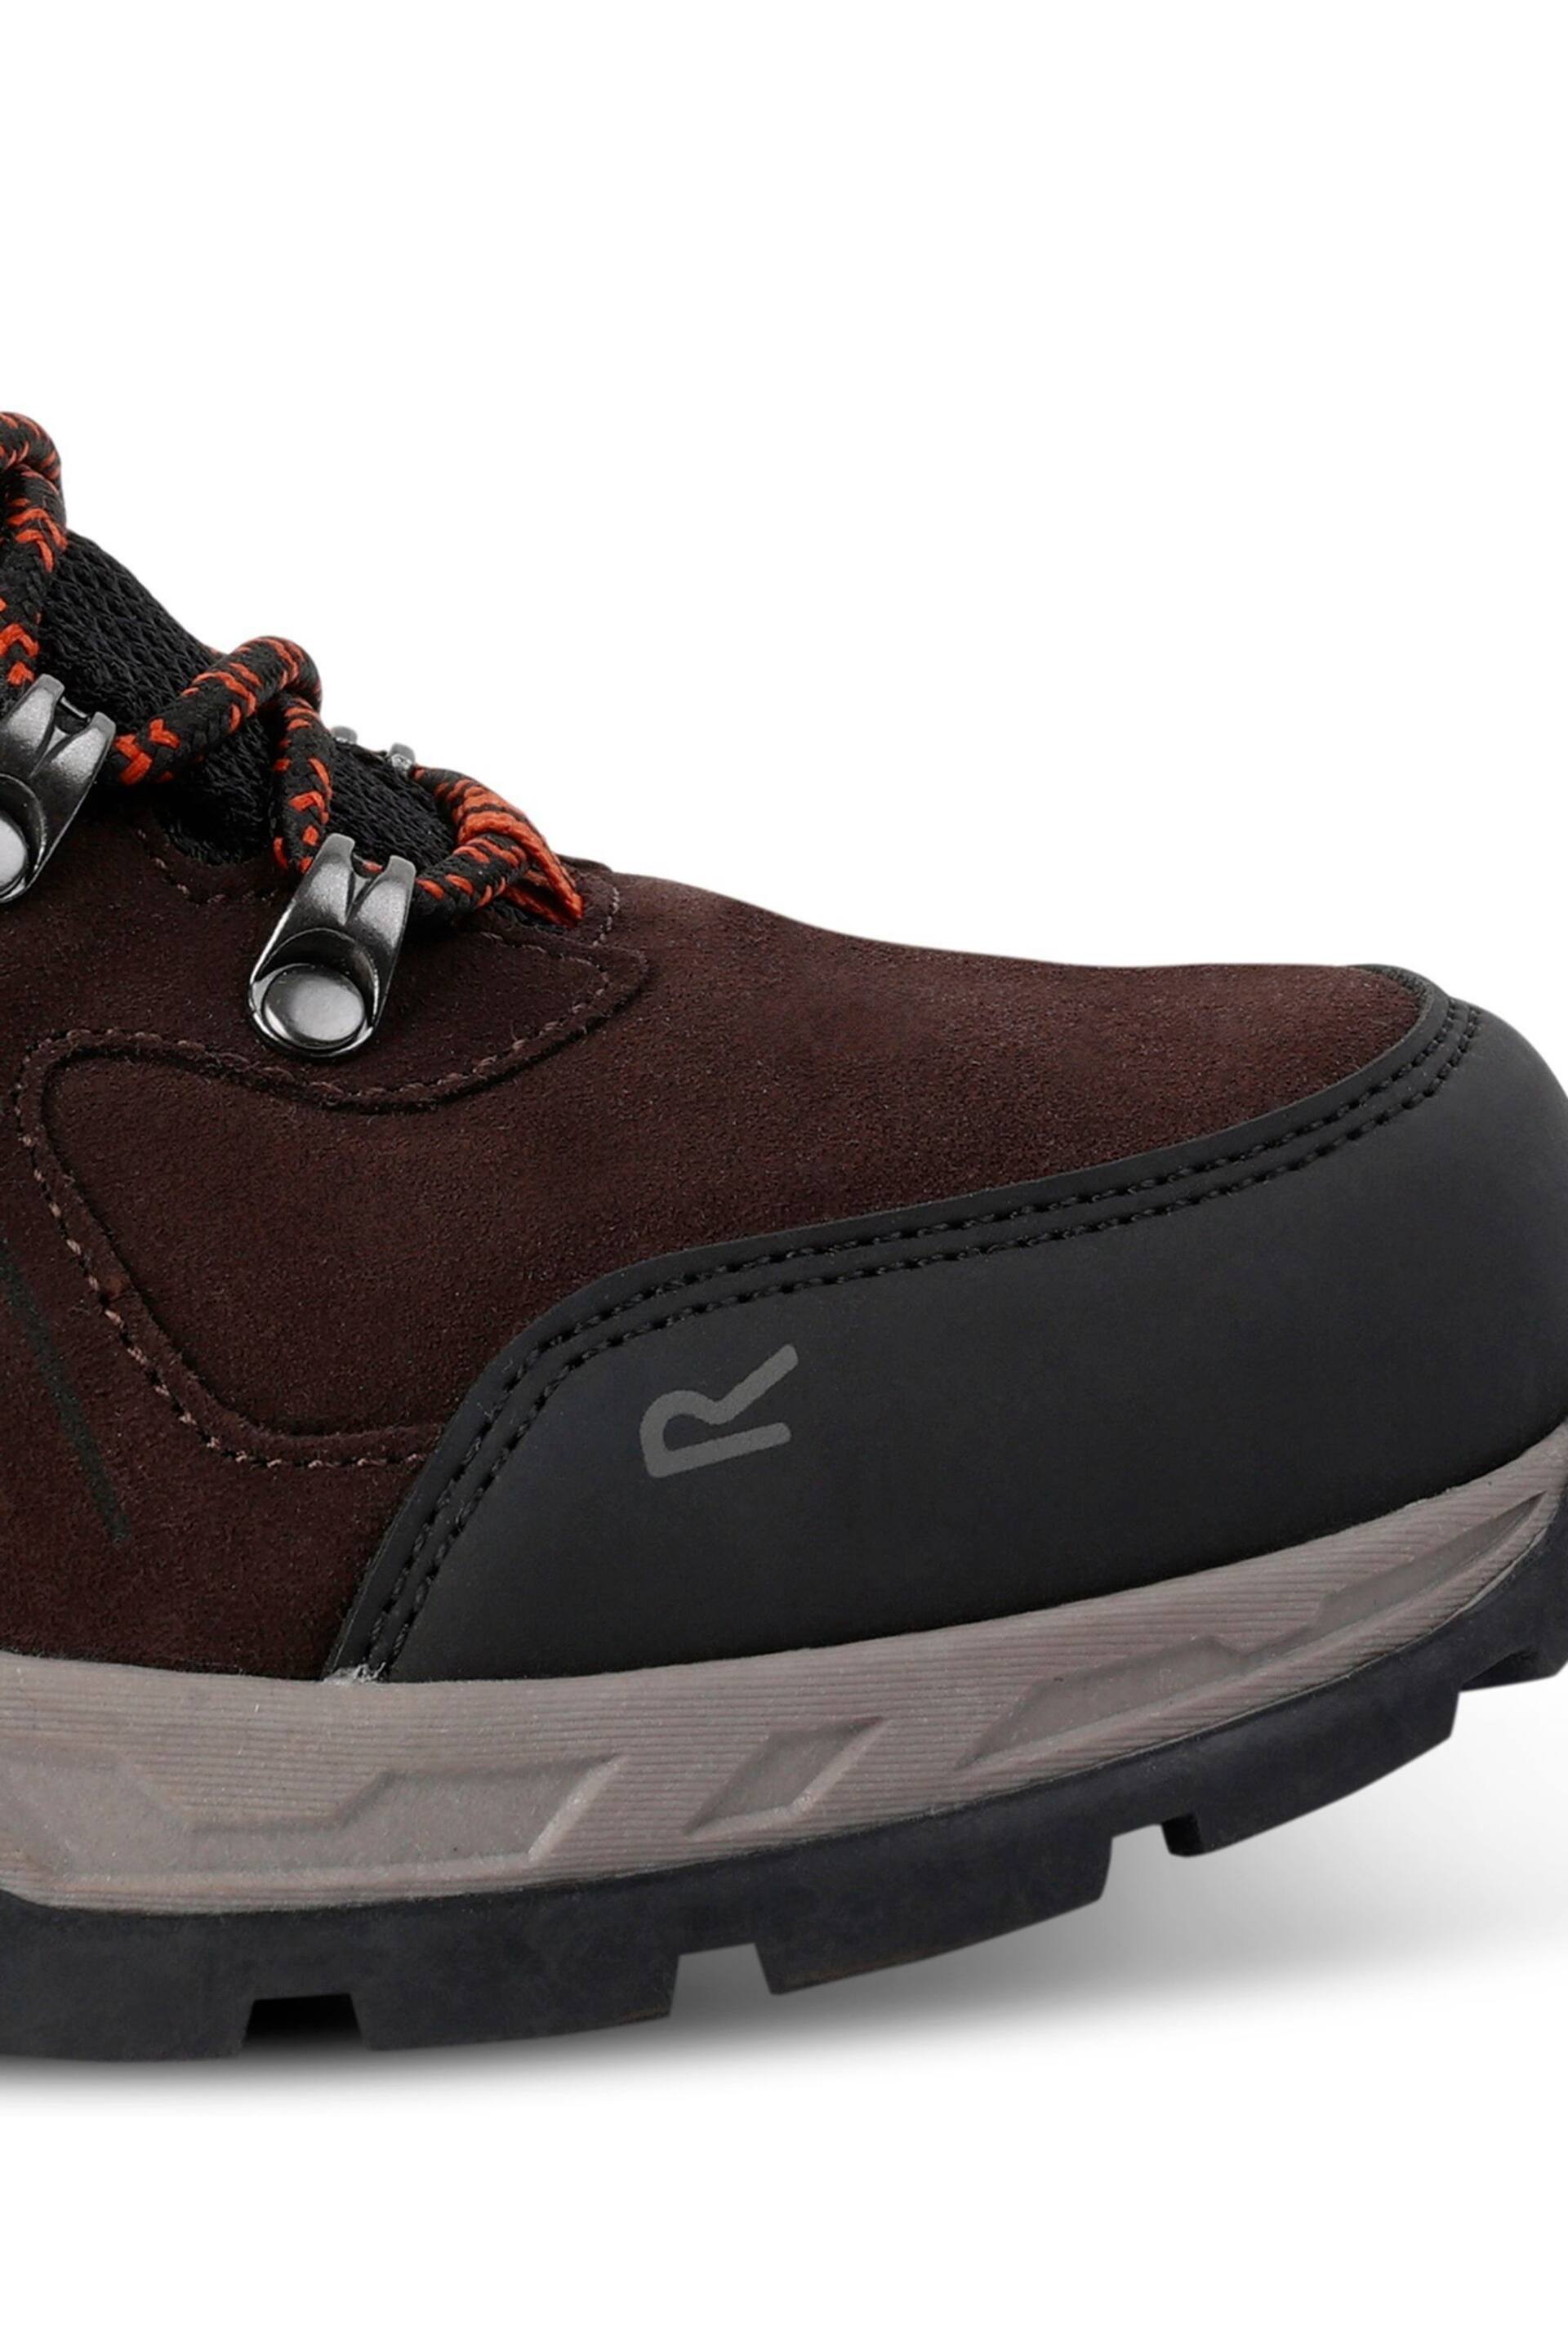 Regatta Brown Vendeavour Suede Waterproof Hiking Boots - Image 8 of 8